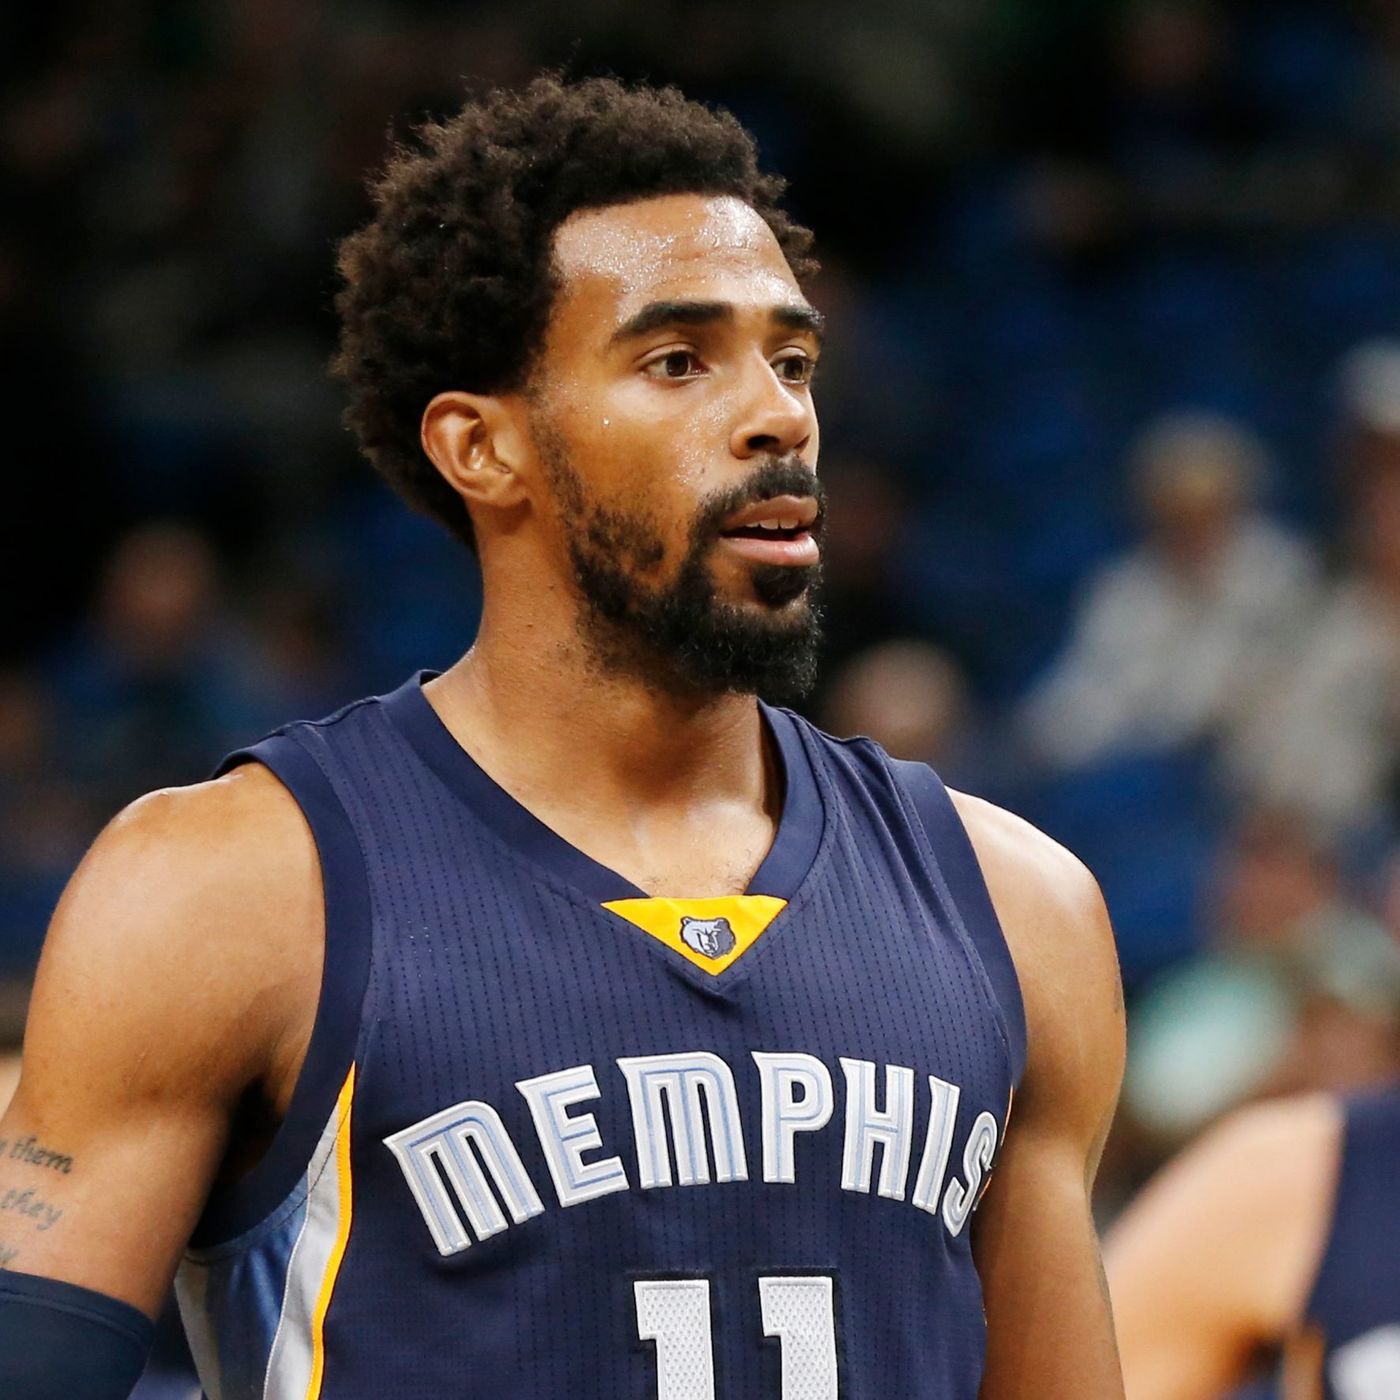 Mike Conley on being the highest paid player and virtual reality comes to the NBA